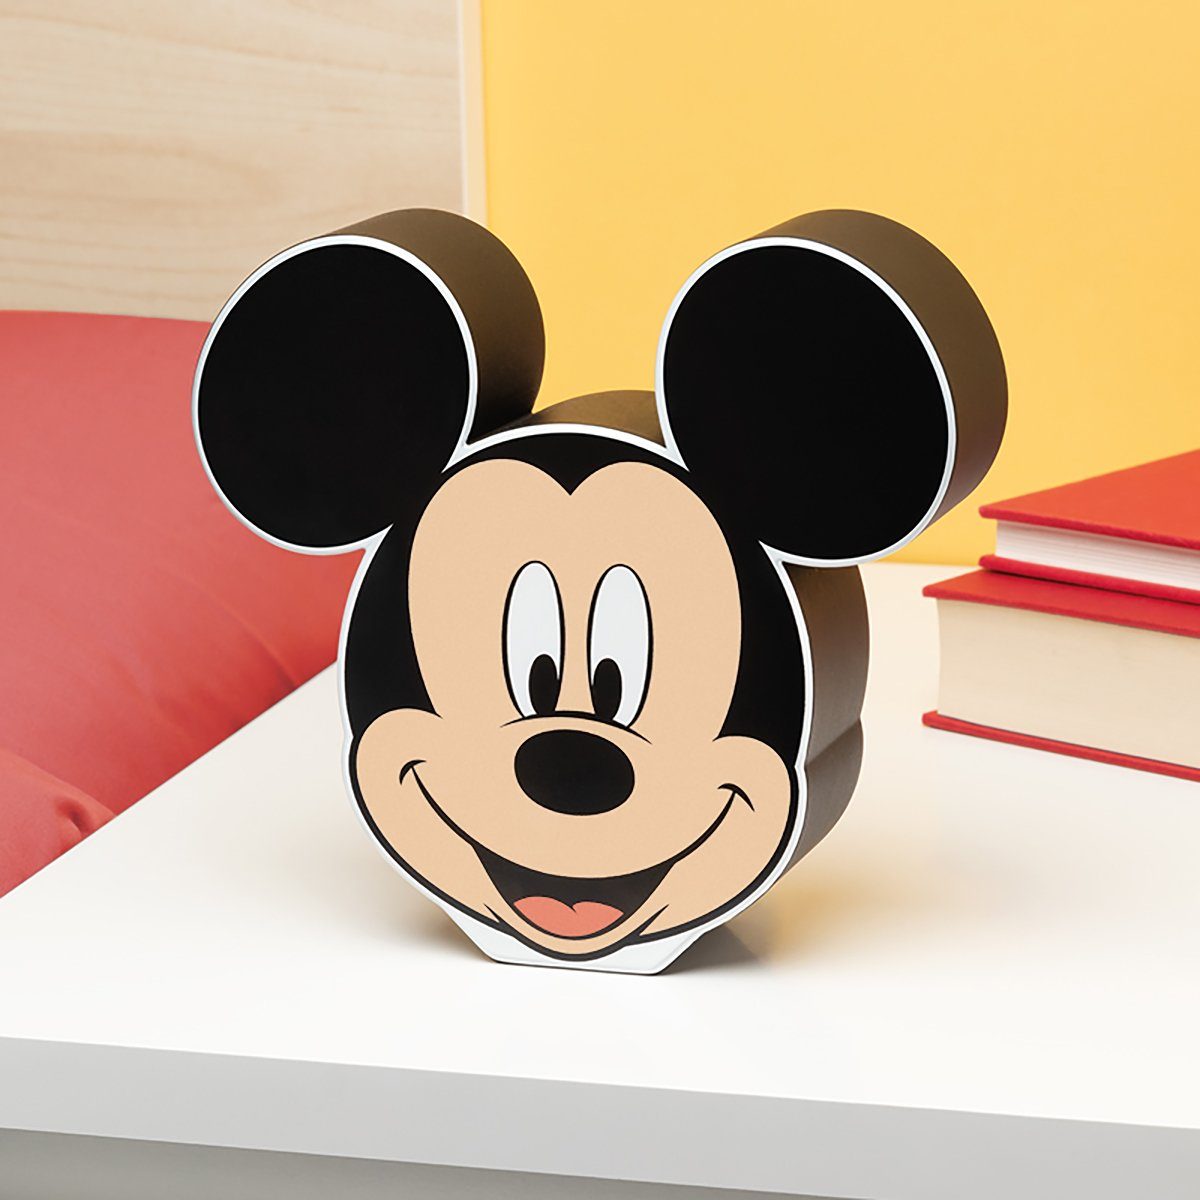 Paladone Stehlampe Disney Mickey Mouse Leuchte